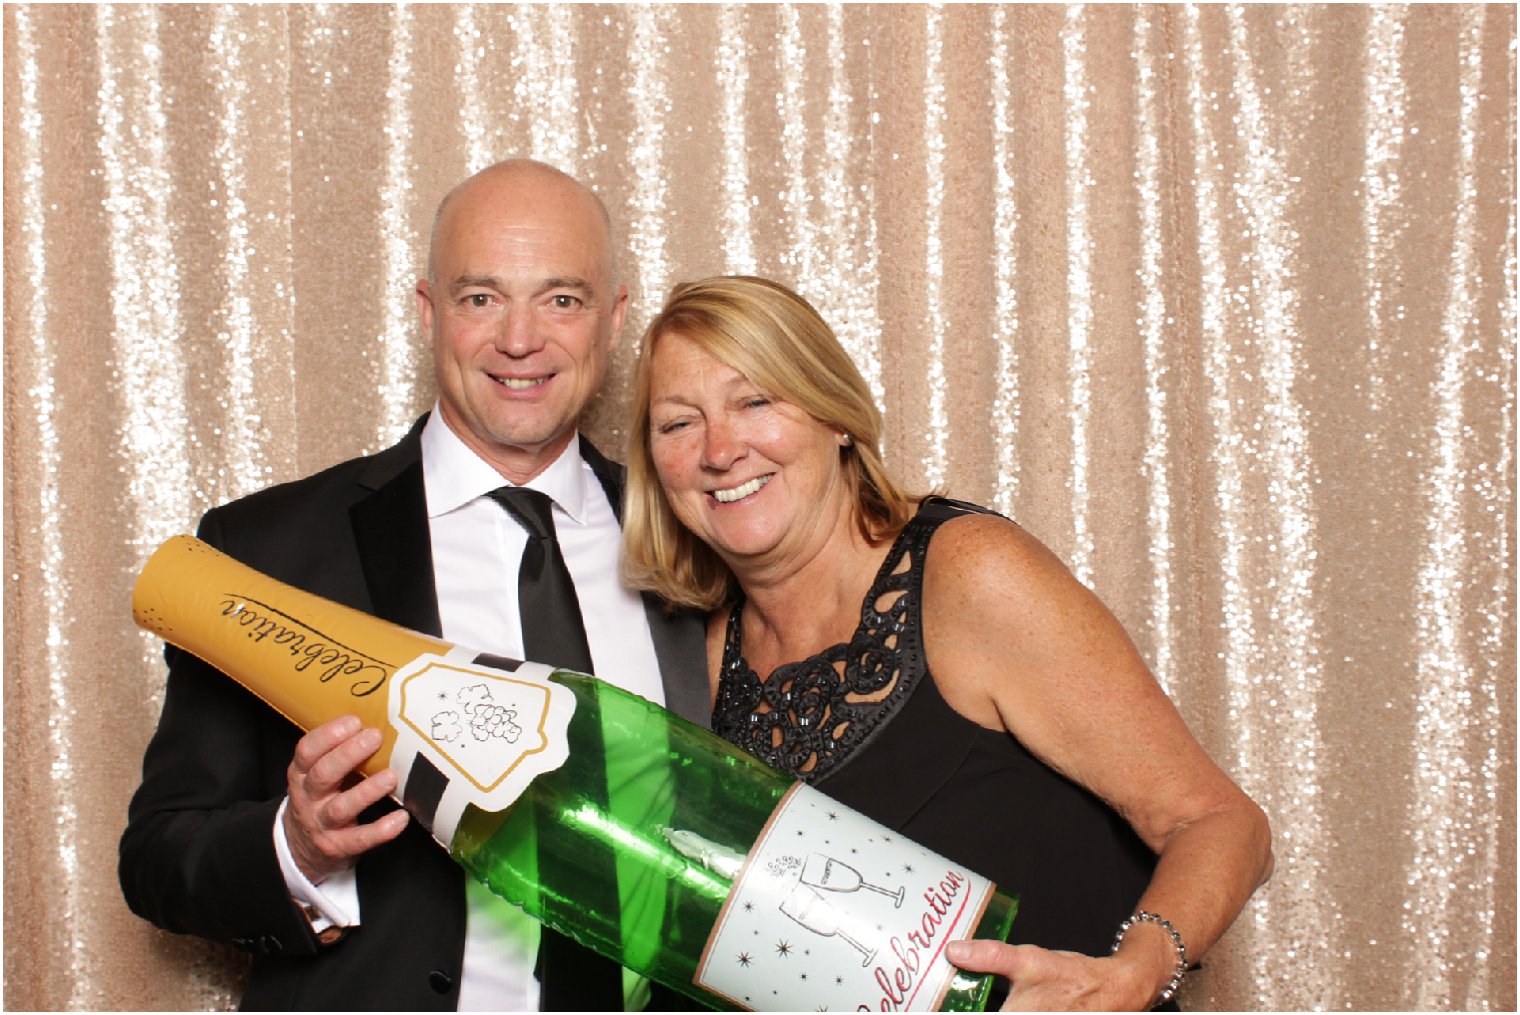 Photo Booth with champagne bottle